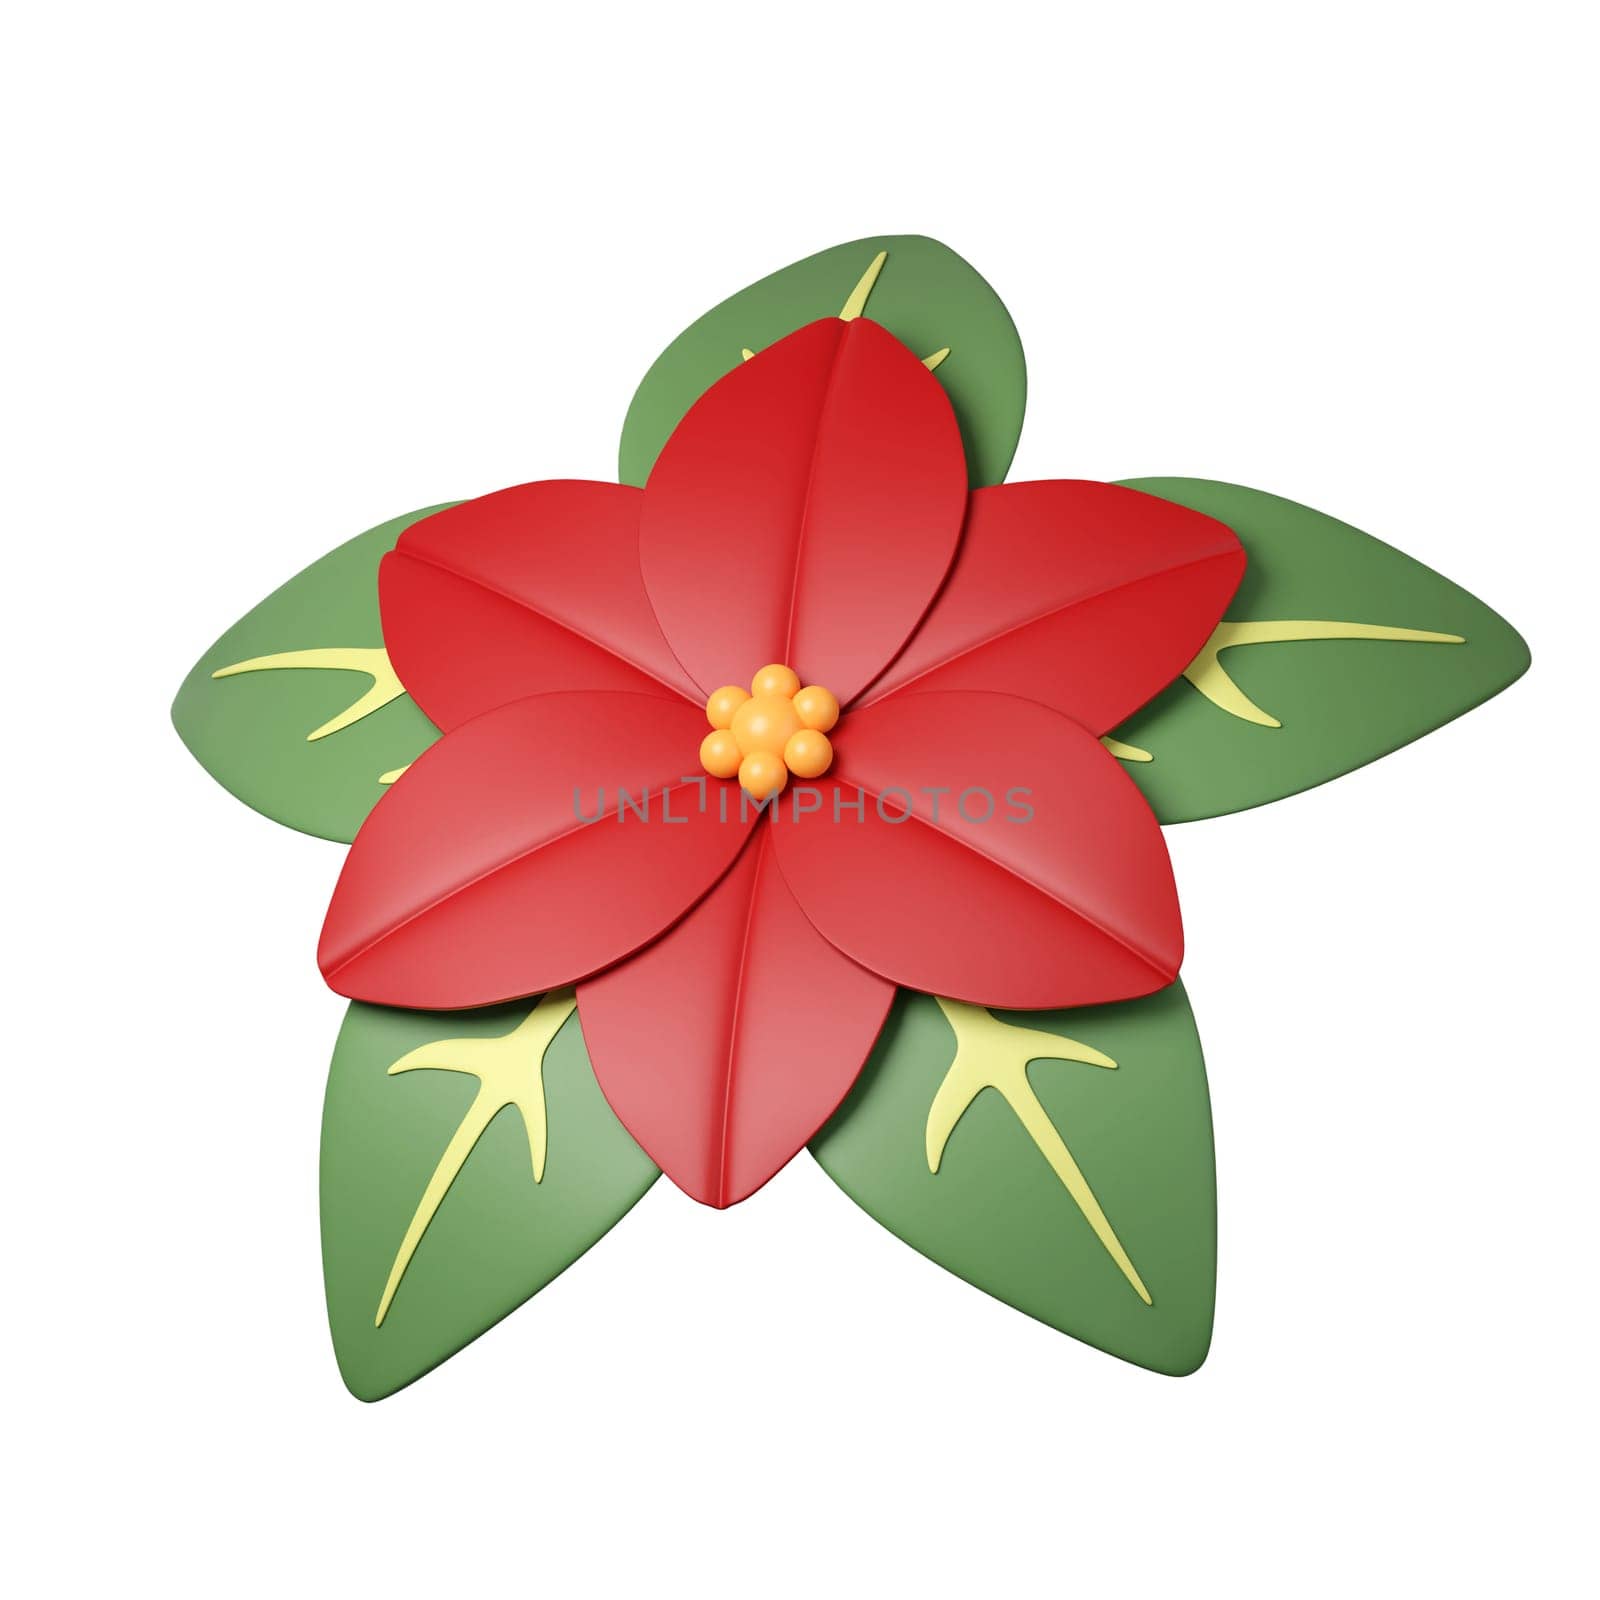 3d Christmas Poinsettia flower icon. minimal decorative festive conical shape tree. New Year's holiday decor. 3d design element In cartoon style. Icon isolated on white background. 3d illustration.